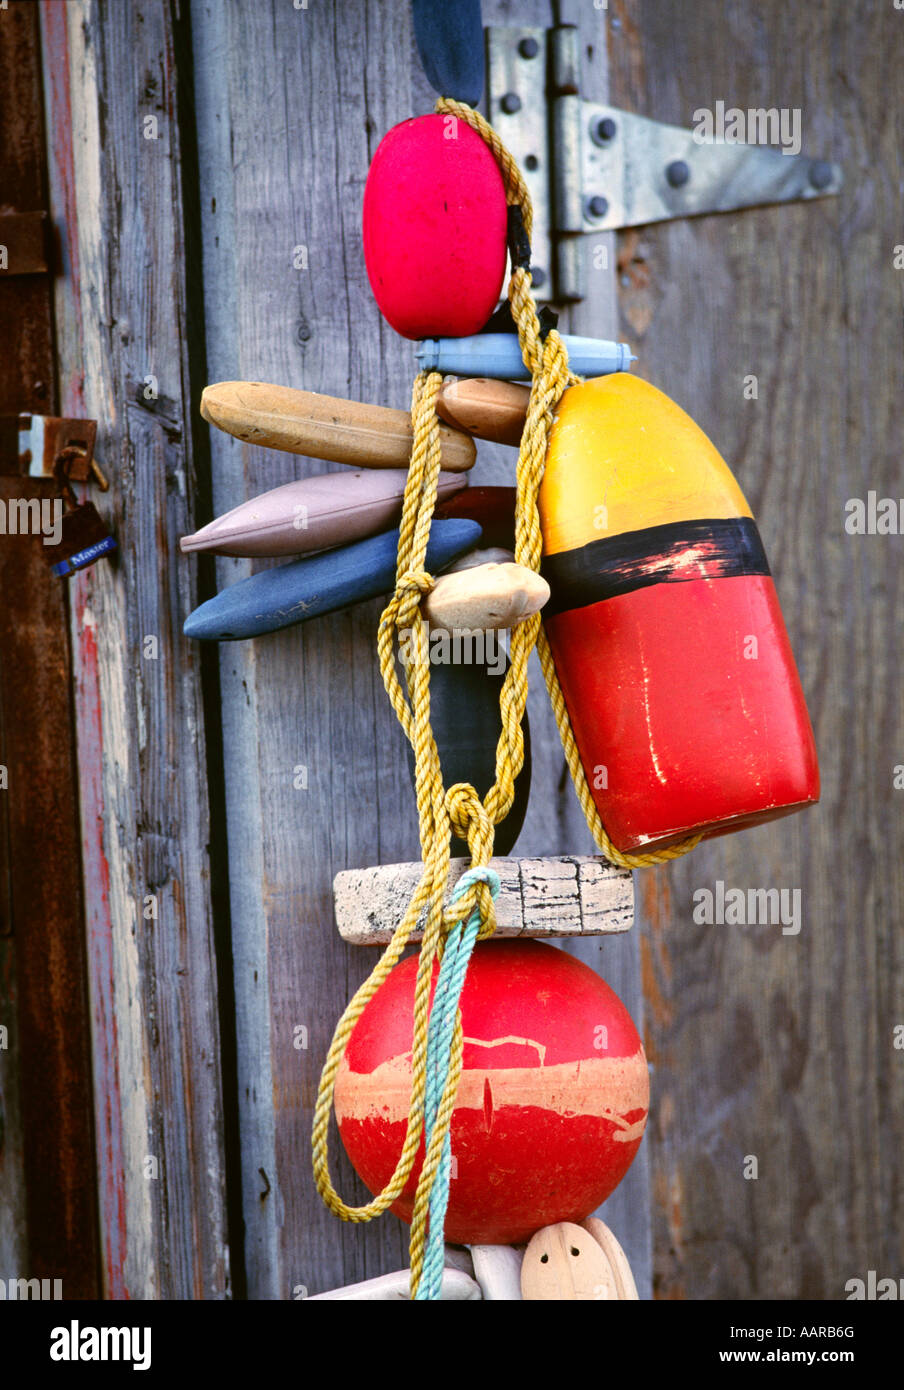 https://c8.alamy.com/comp/AARB6G/fishing-net-floats-decorate-the-wall-of-an-old-fisherman-s-shack-homer-AARB6G.jpg